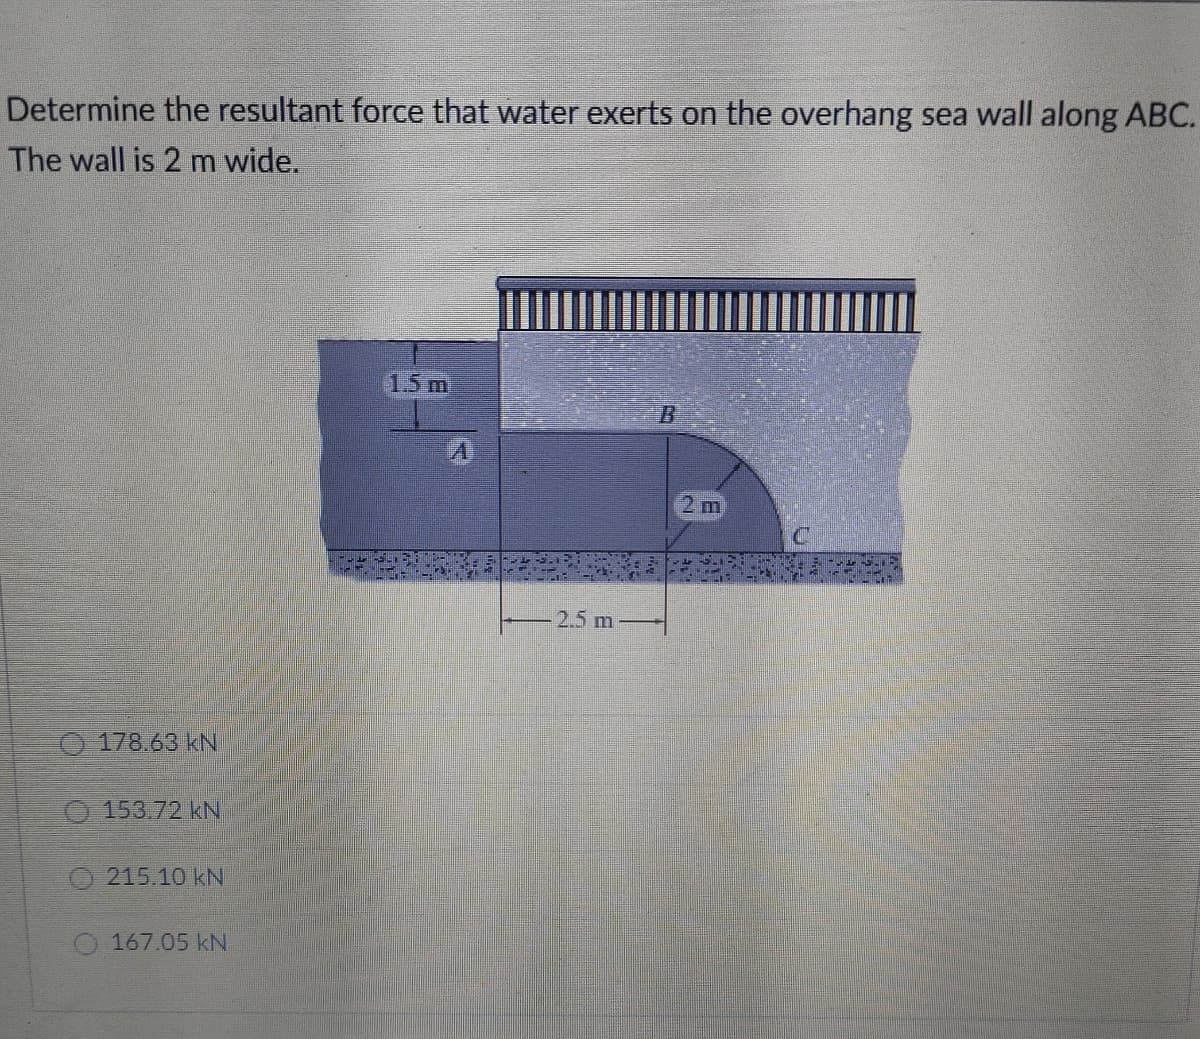 Determine the resultant force that water exerts on the overhang sea wall along ABC.
The wall is 2 m wide.
1.5 m
2 m
2.5 m
O 178.63 kNI
153.72 kN
215.10 kN
O 167.05 kN
